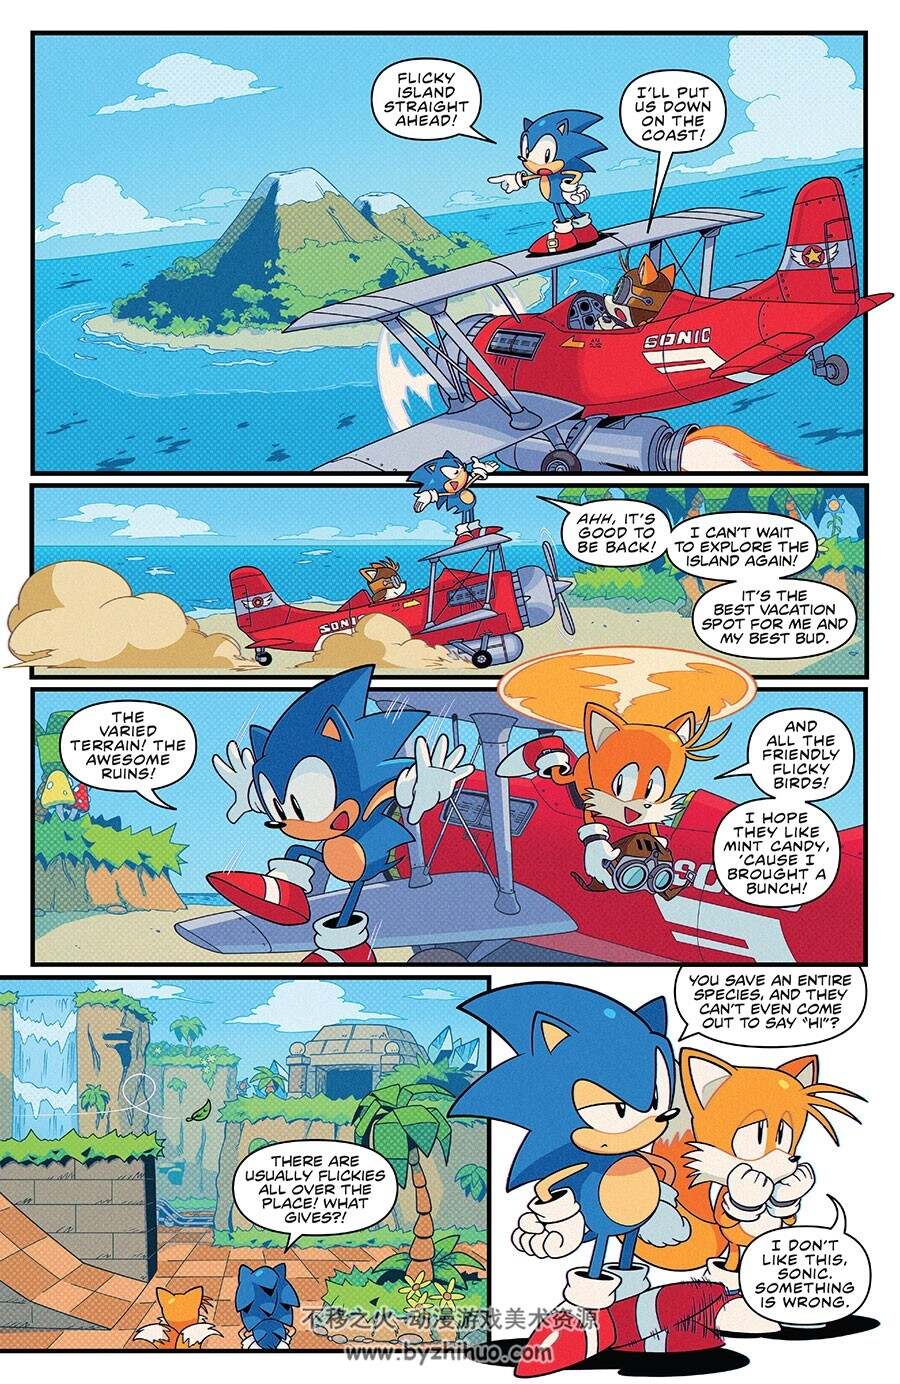 Sonic The Hedgehog Tails 30th Anniversary Special 漫画 百度网盘下载